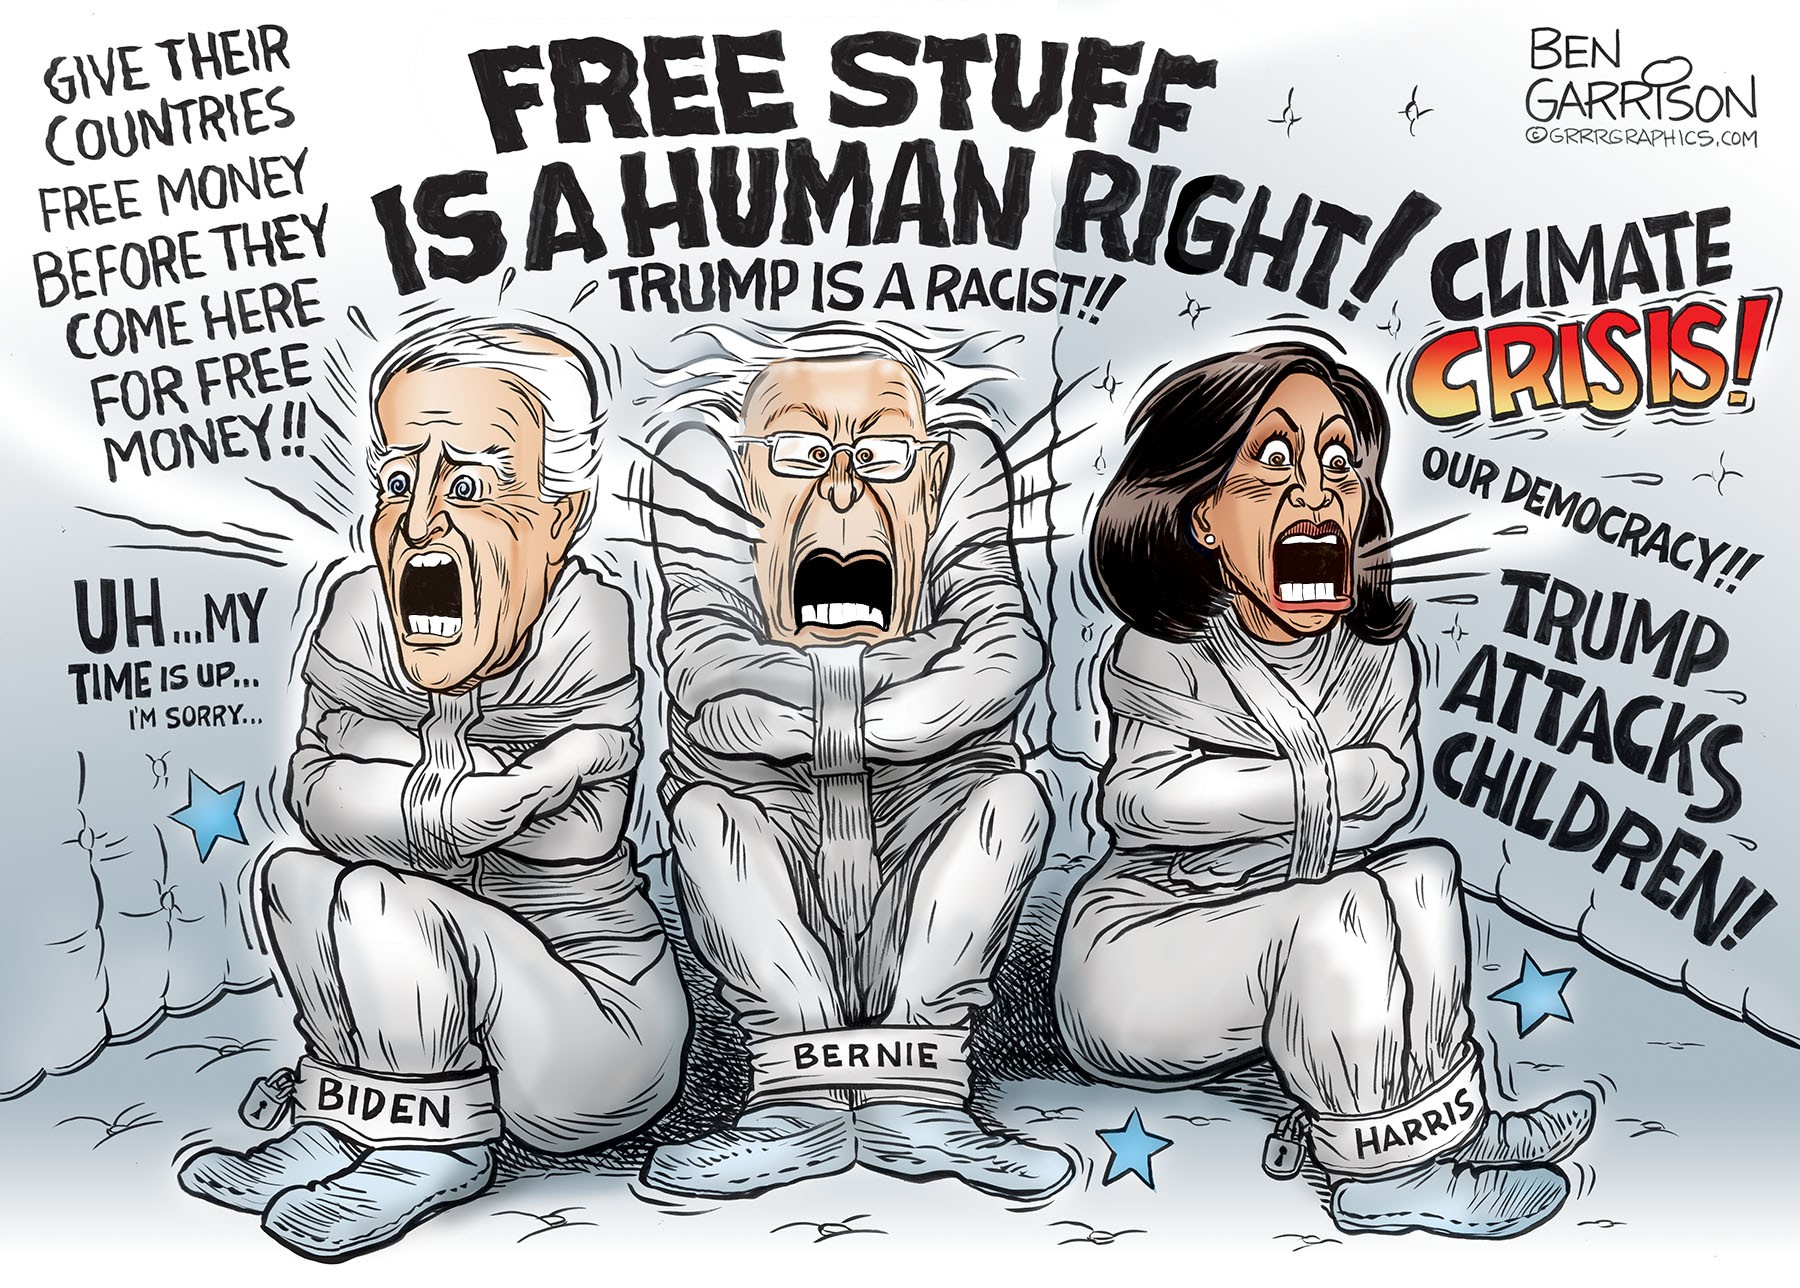 stupid democrat cartoons - Ben Free Stuff A Arrebon Grrgraphics.Com Ca Human Rights Climate Give Their Countries Free Money Before They Come Here For Free Trump Is A Racisti Cistii Scrisis! Money! Tong Our Democracy!! Vtrump Uh...My Time Is Up... I'M Sorr